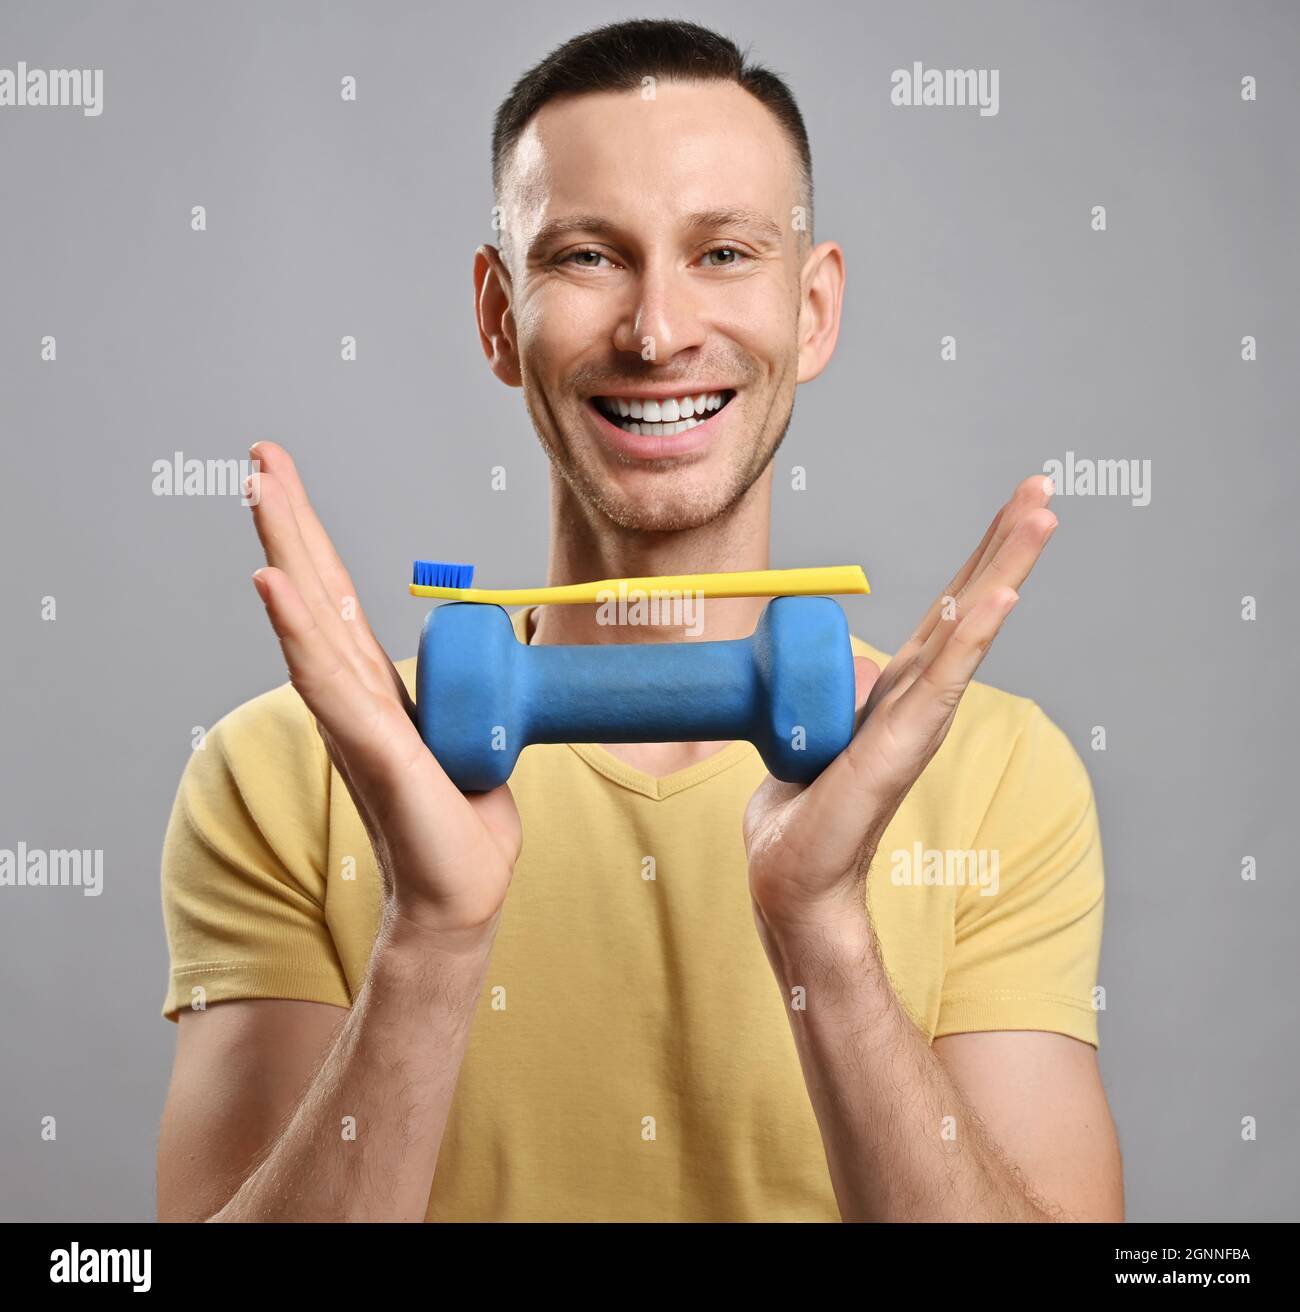 Portrait of happy friendly smiling adult man in yellow t-shirt promoting healthy lifestyle with toothbrush and dumbbell Stock Photo